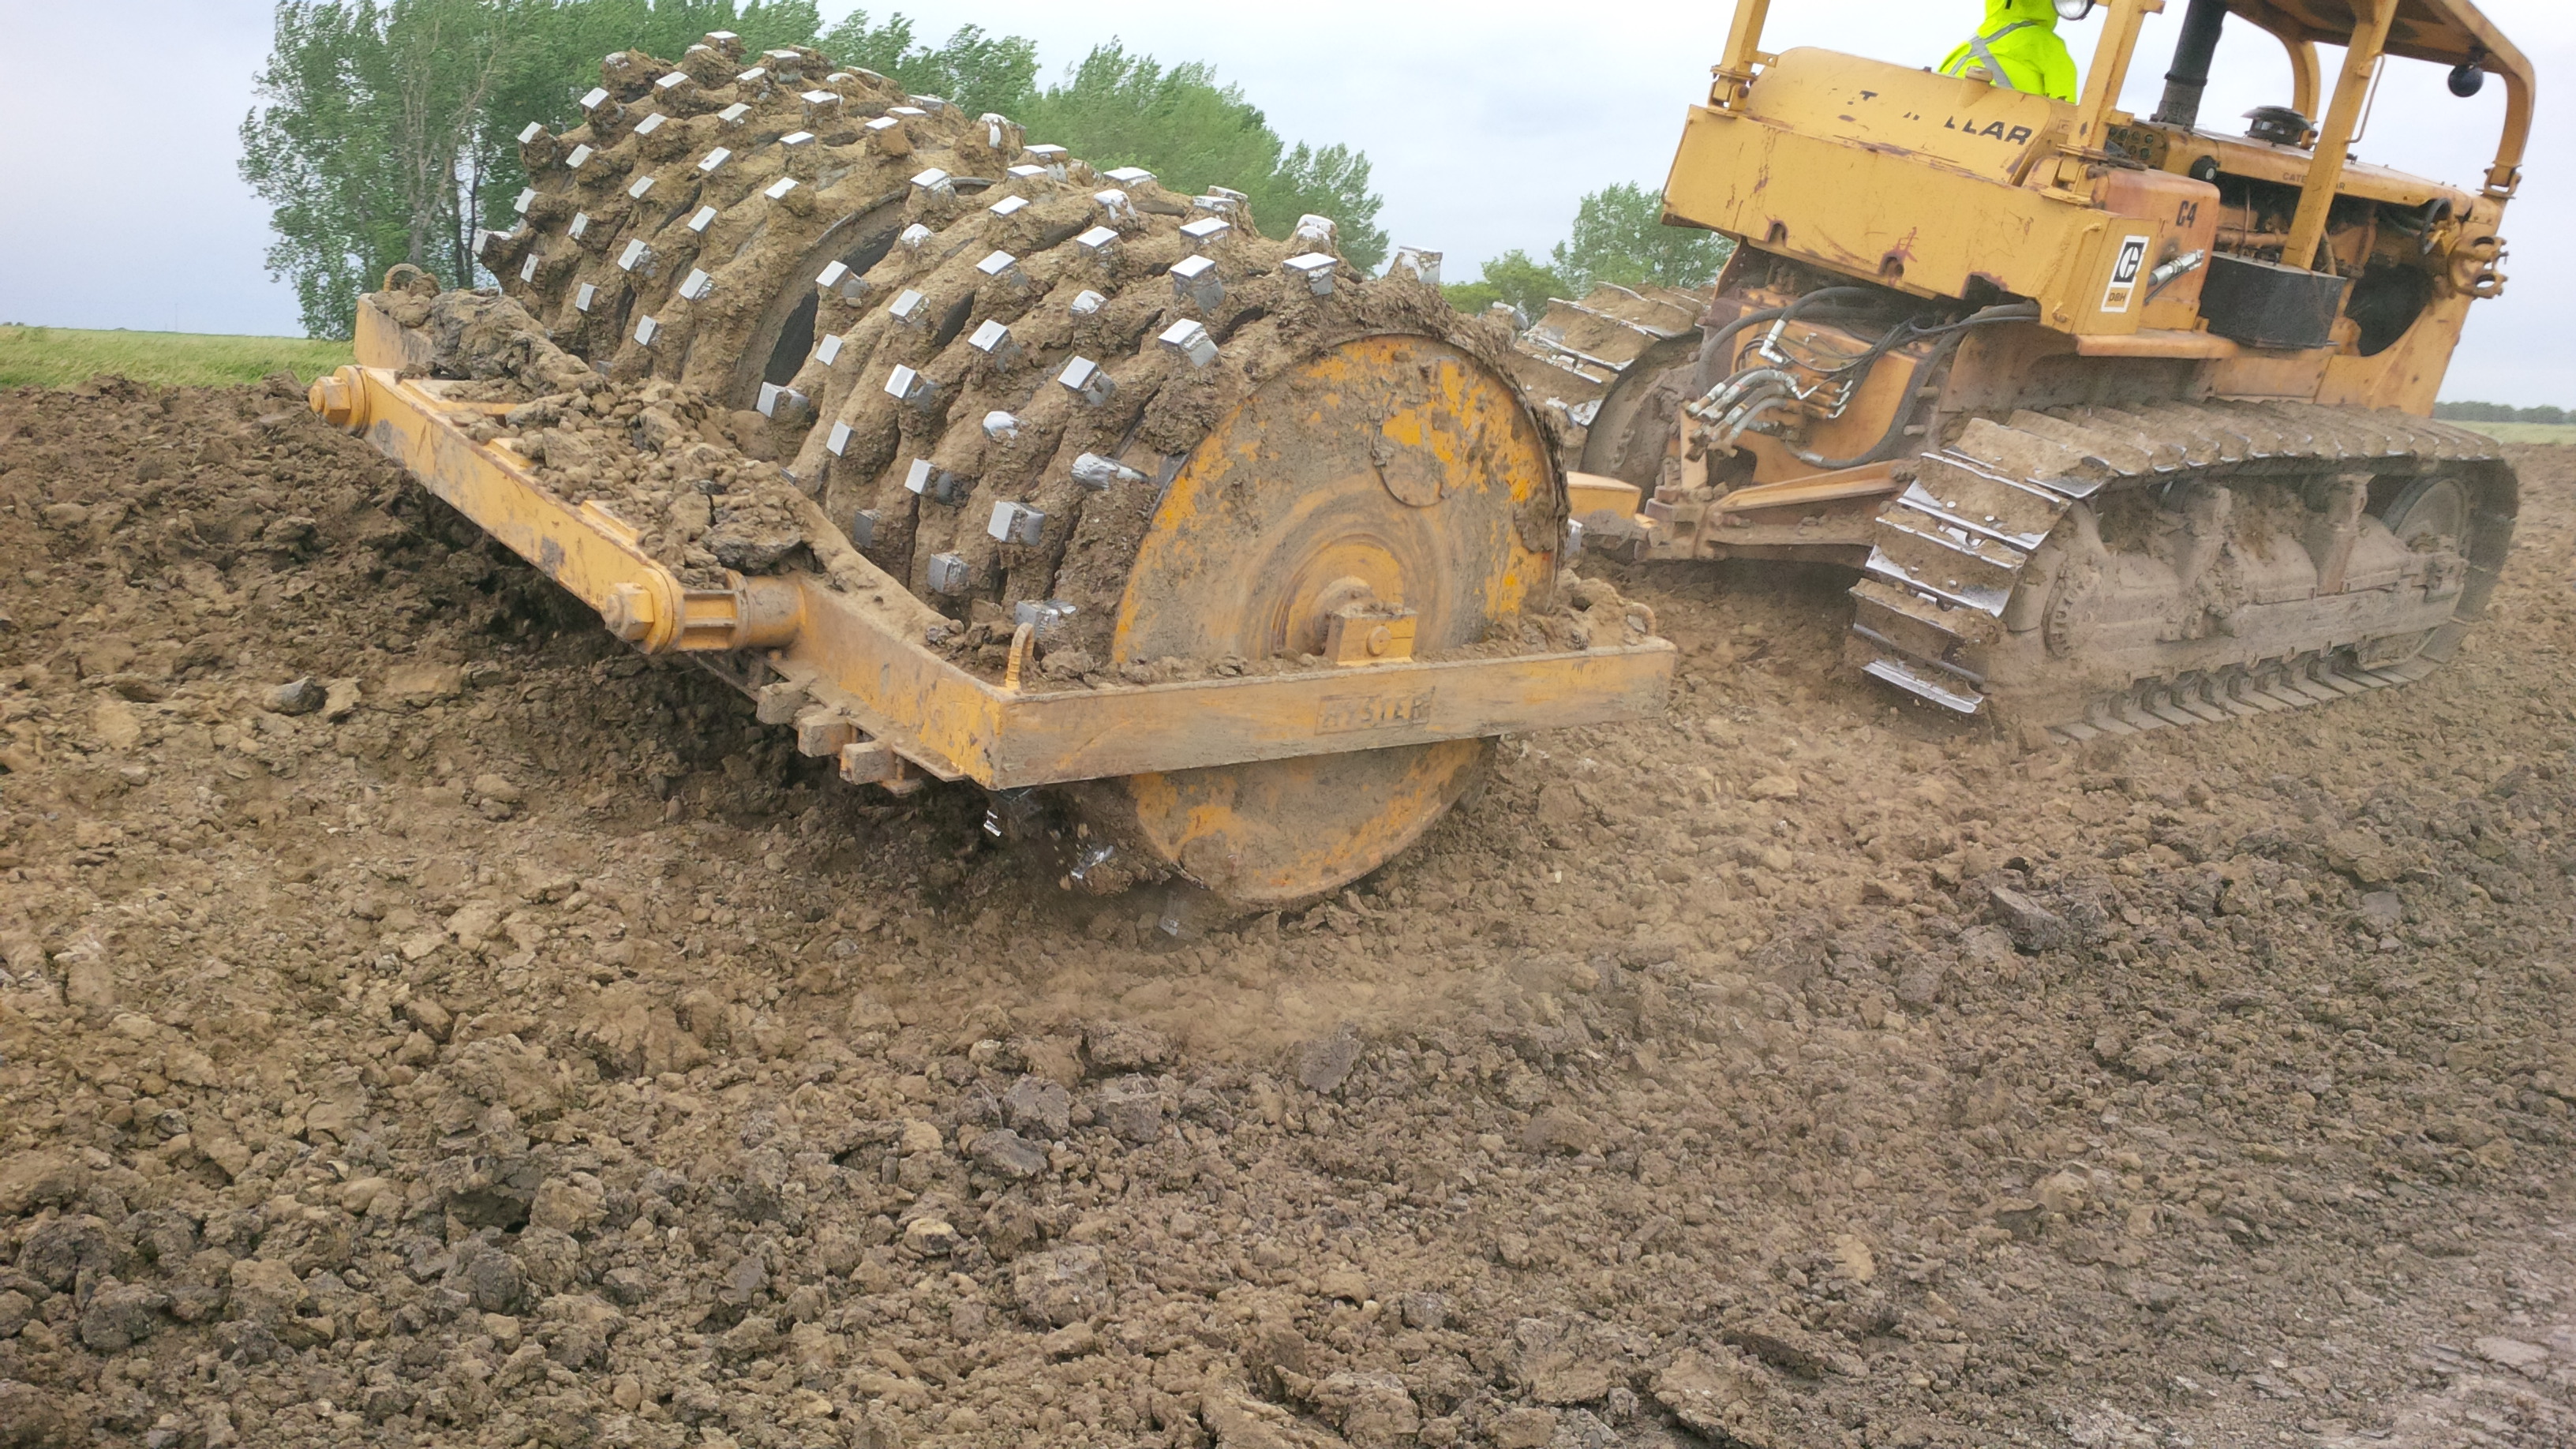 Compacting soil using a sheepsfoot roller